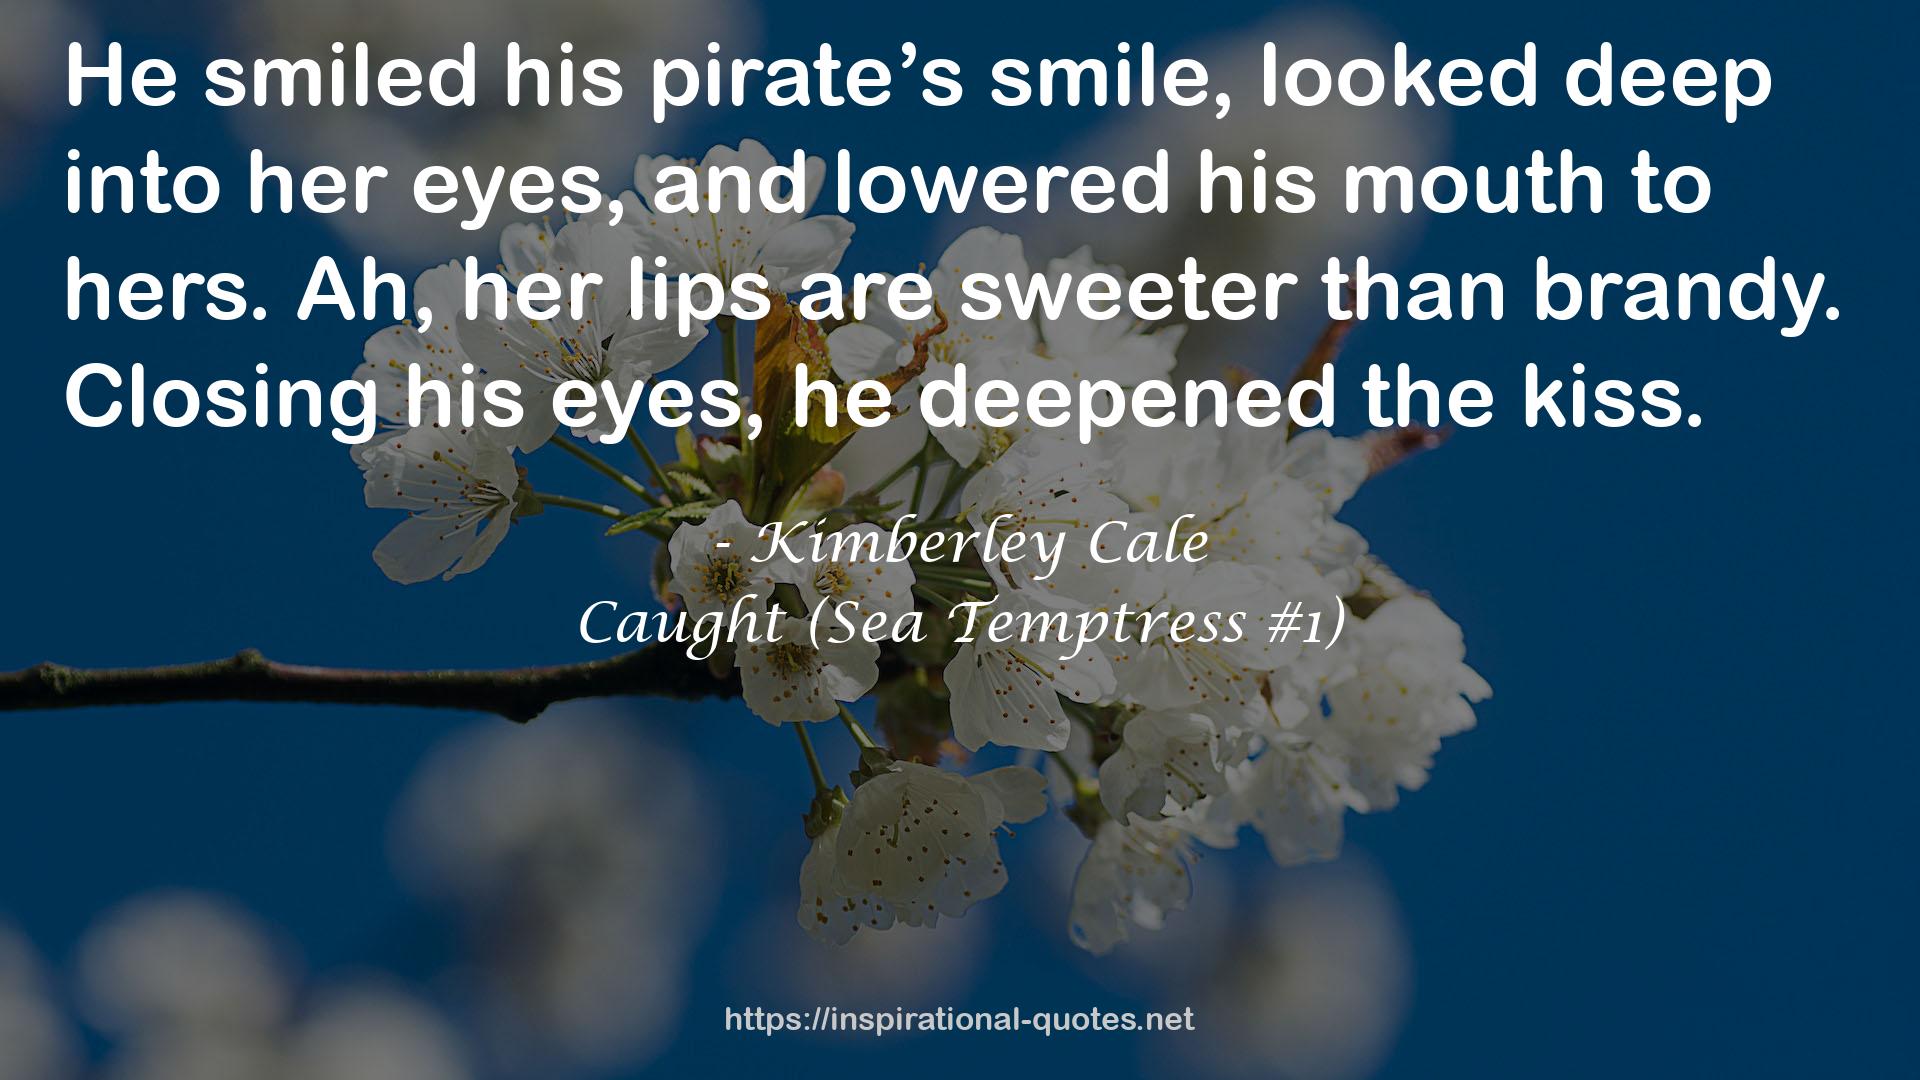 Kimberley Cale QUOTES